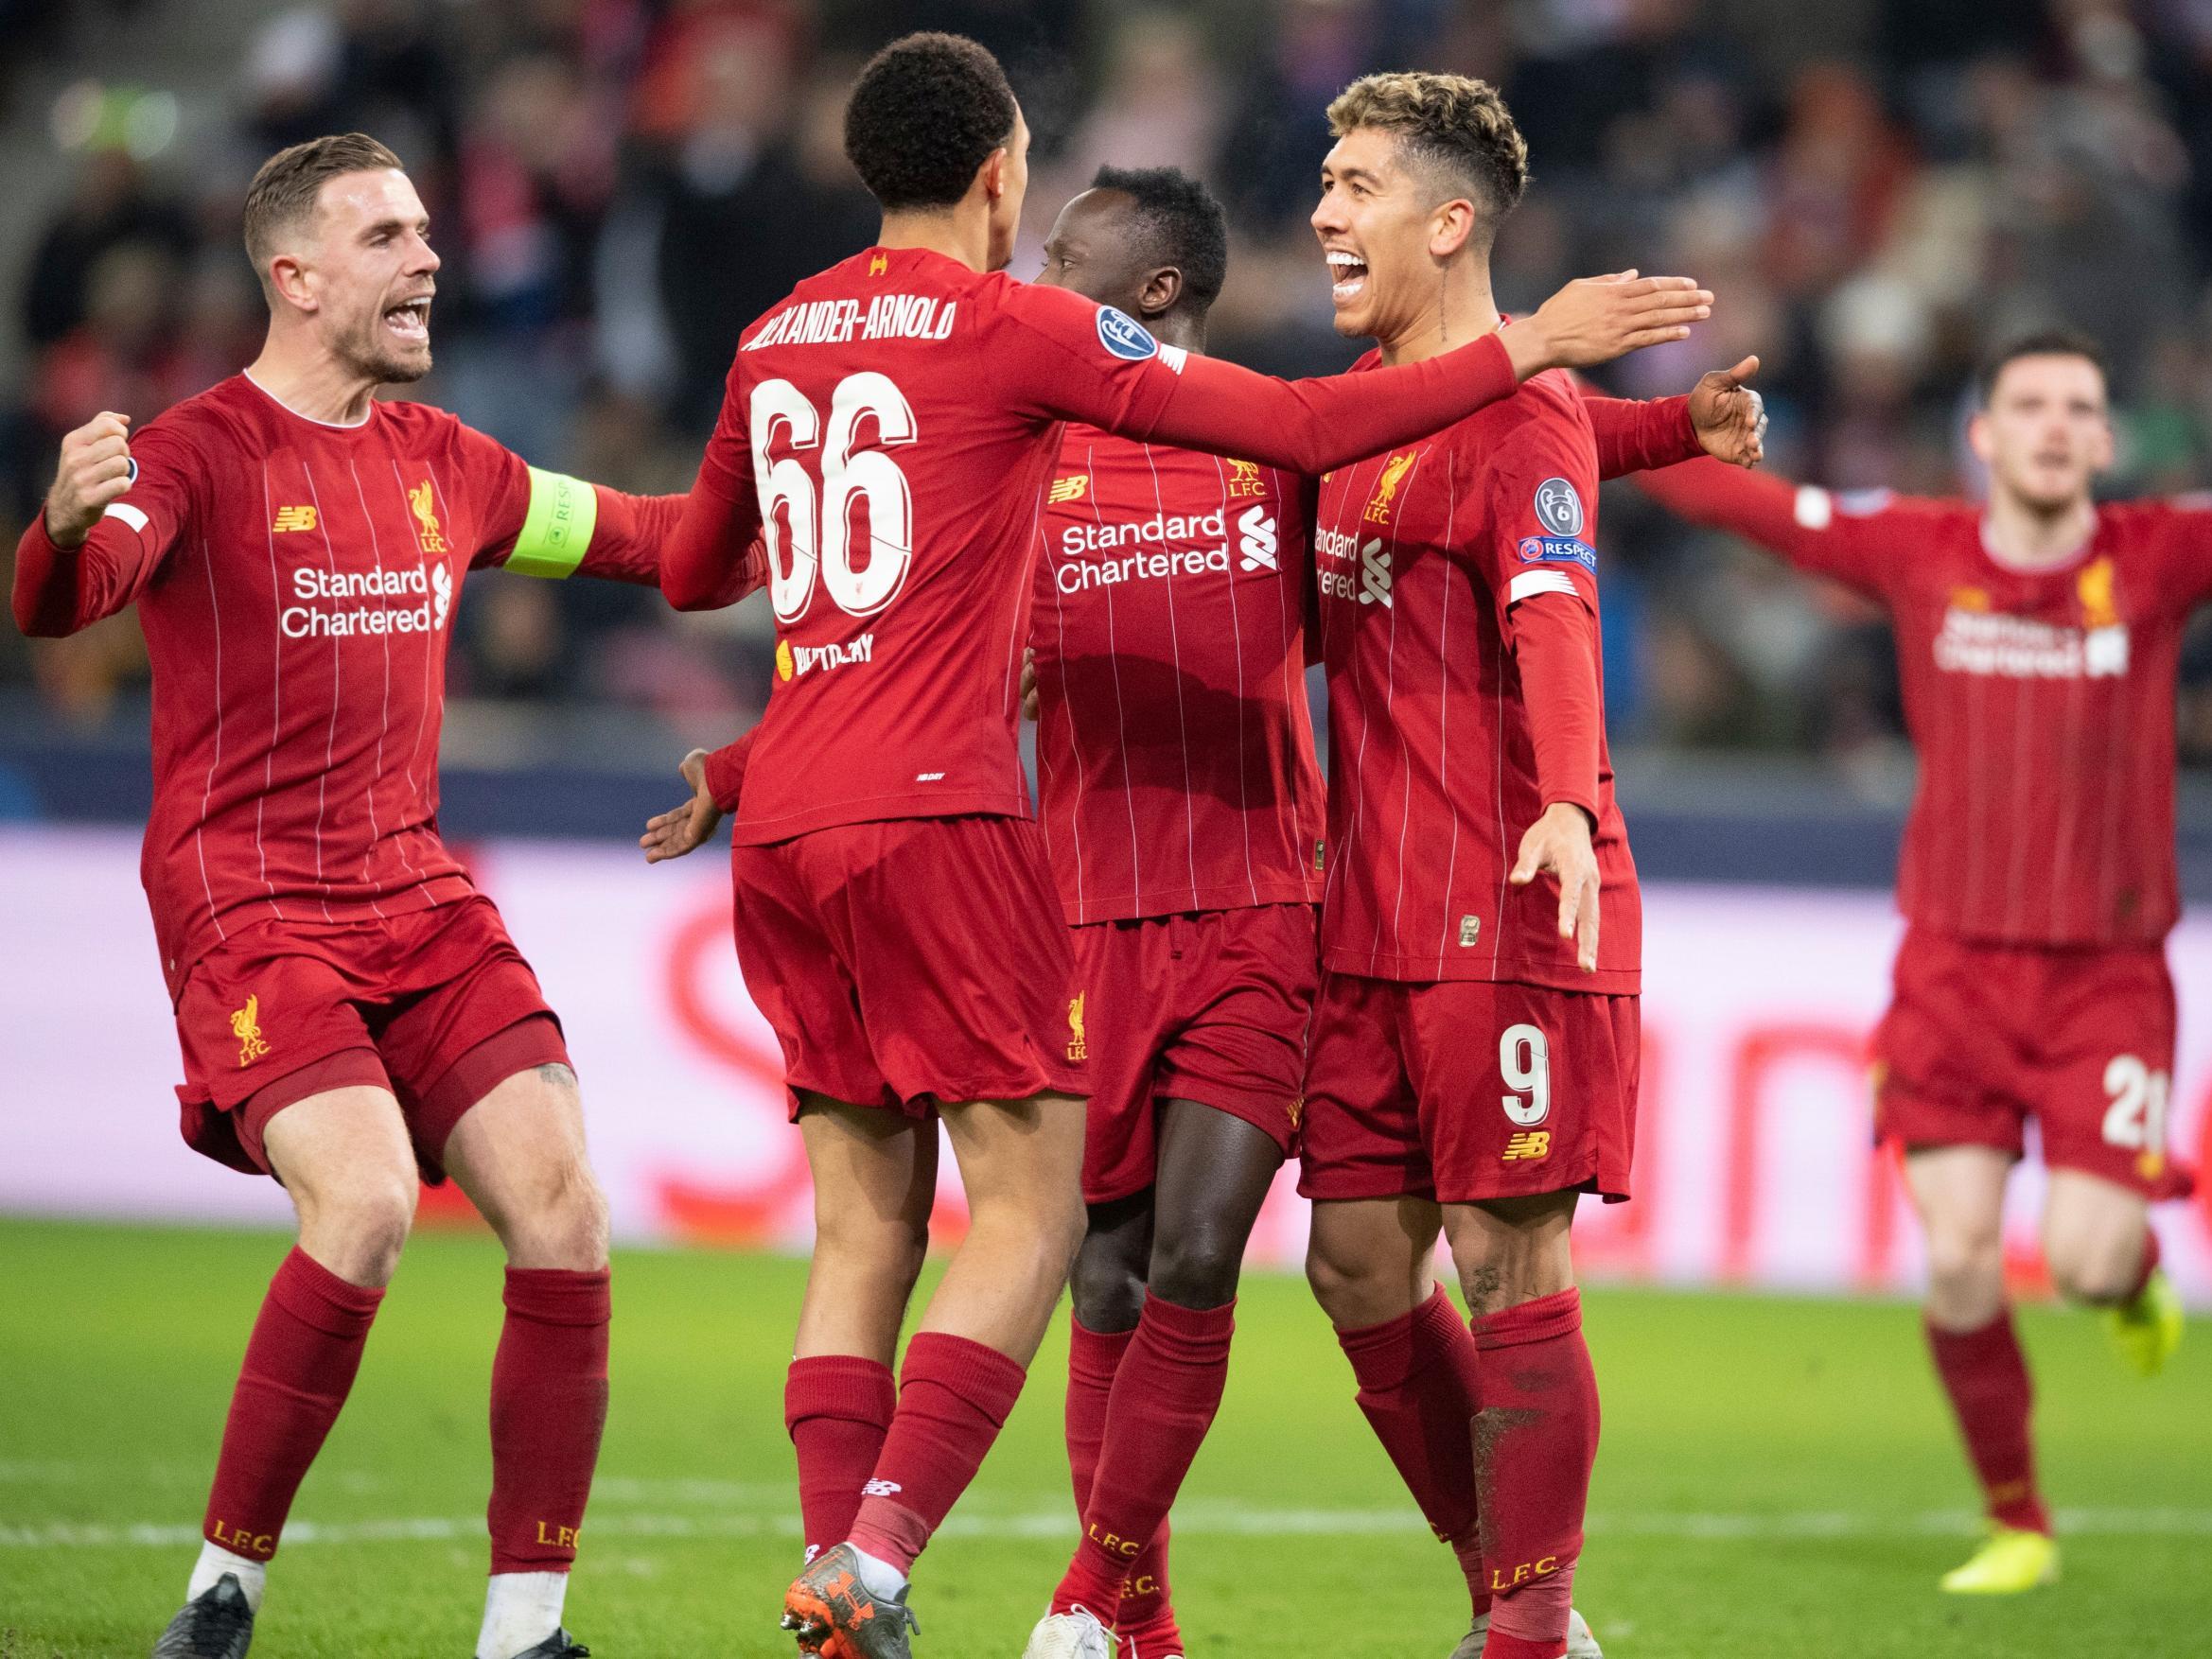 Liverpool will represent Europe after winning the Champions League